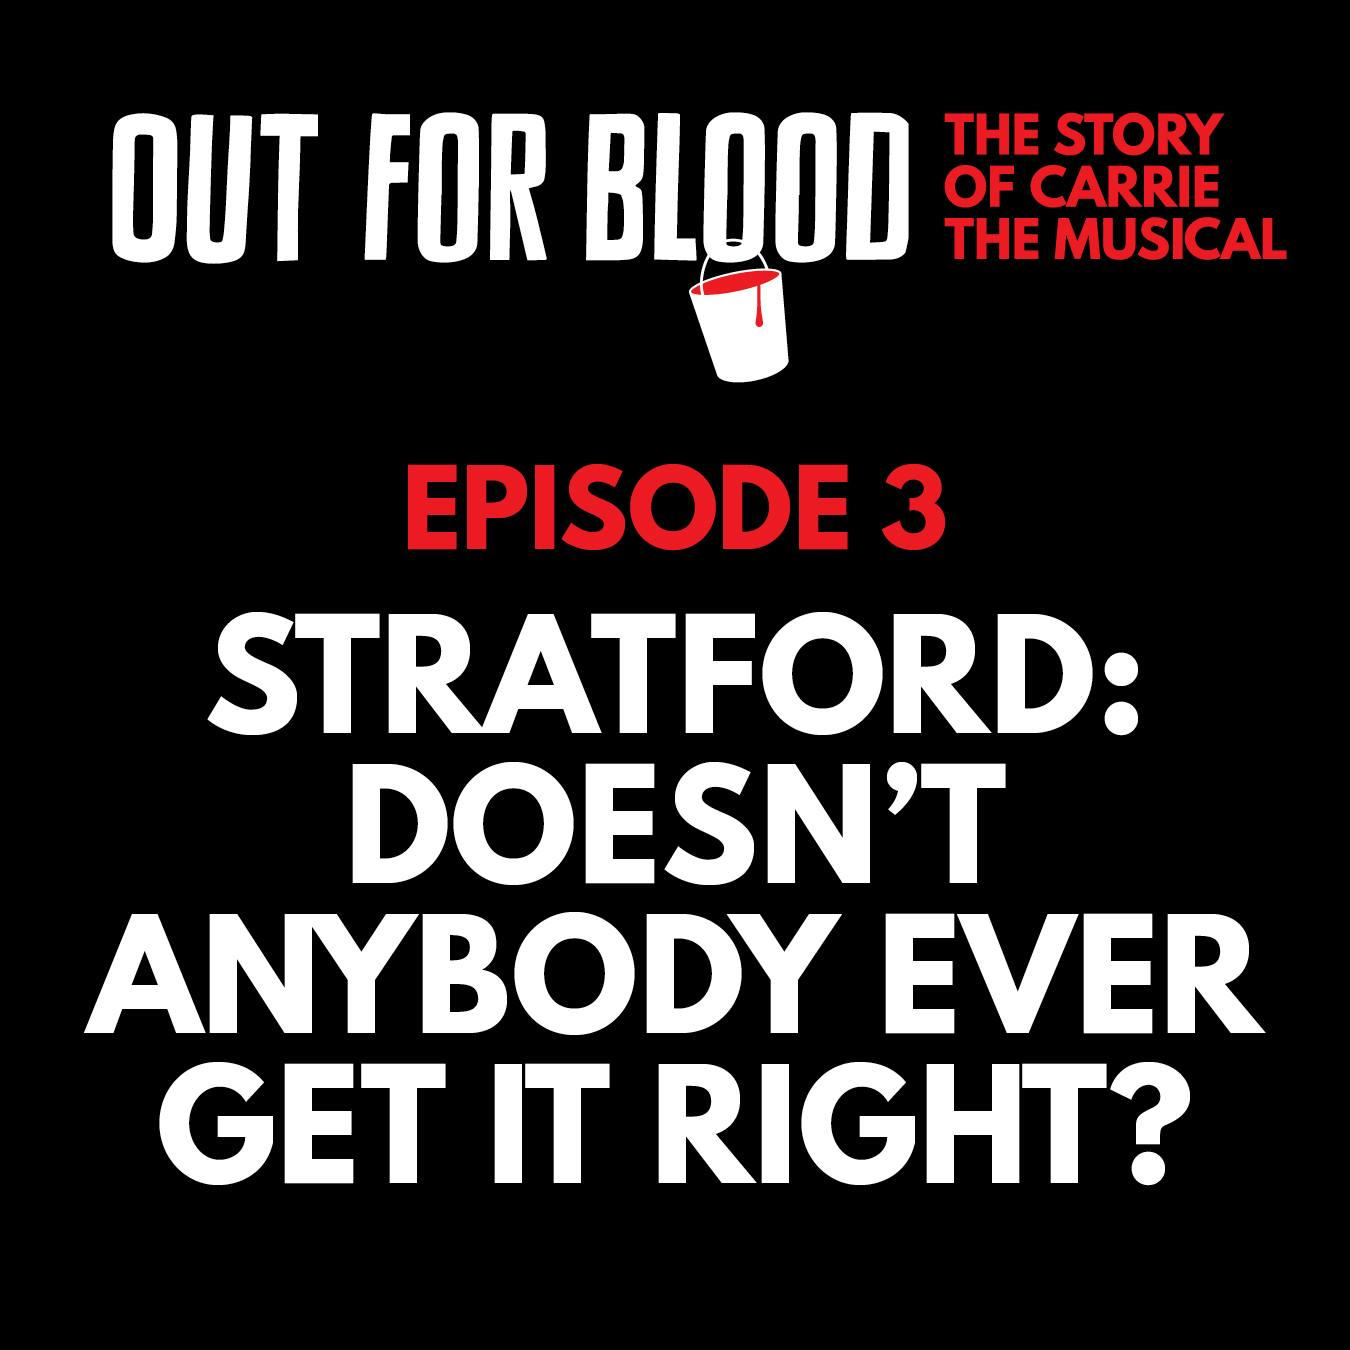 Chapter 3: Stratford: Doesn't anybody ever get it right?